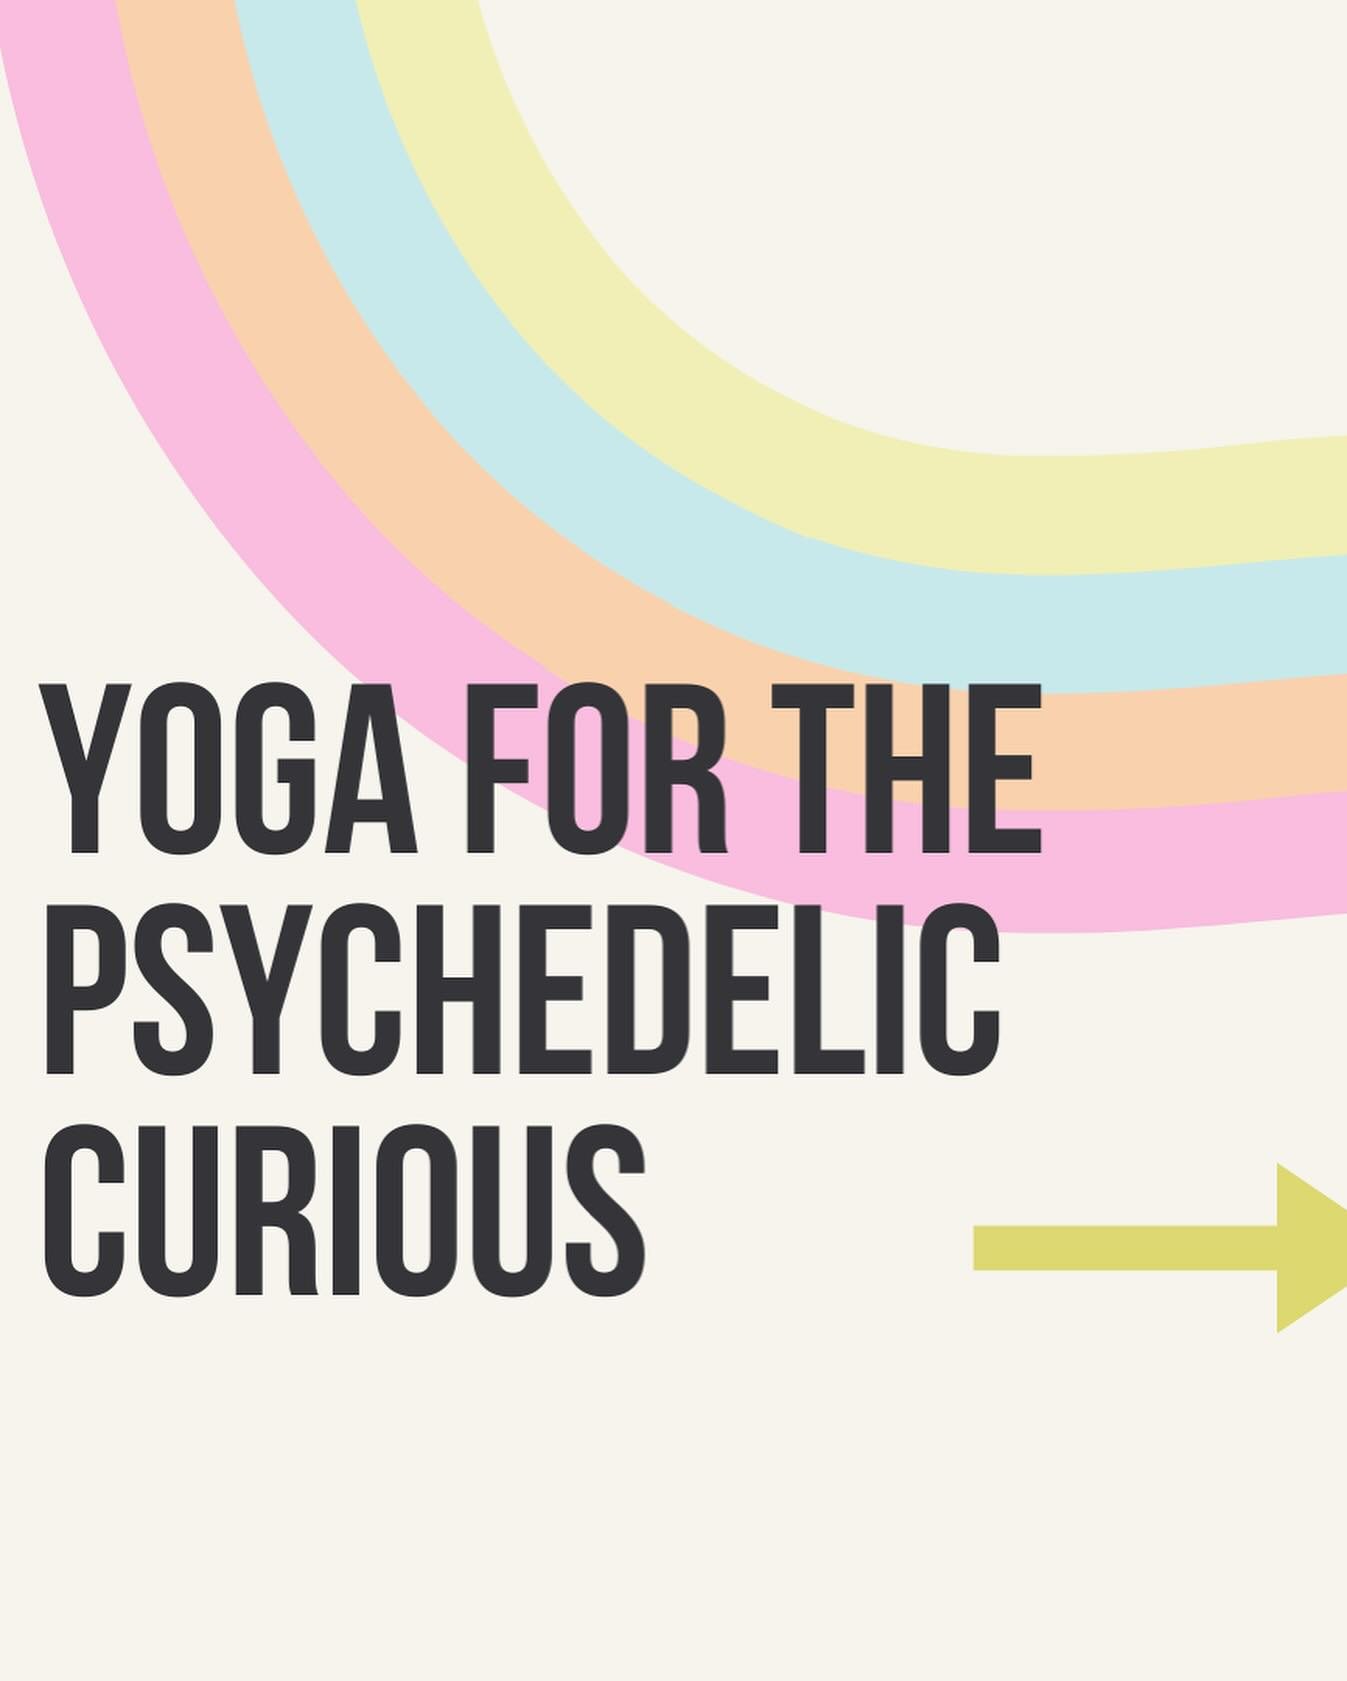 3-Part Series on Yoga for the Psychedelic Curious with @jeanjohnson8736 May 6th, 13th, 20th 7-8:30 pm at Sukha Yoga in Novato. Link in bio to sign up.
#psychedelic #plantmedicine #mindfulness #psychedelicyoga #medicinejourney #psychedelicintegration 